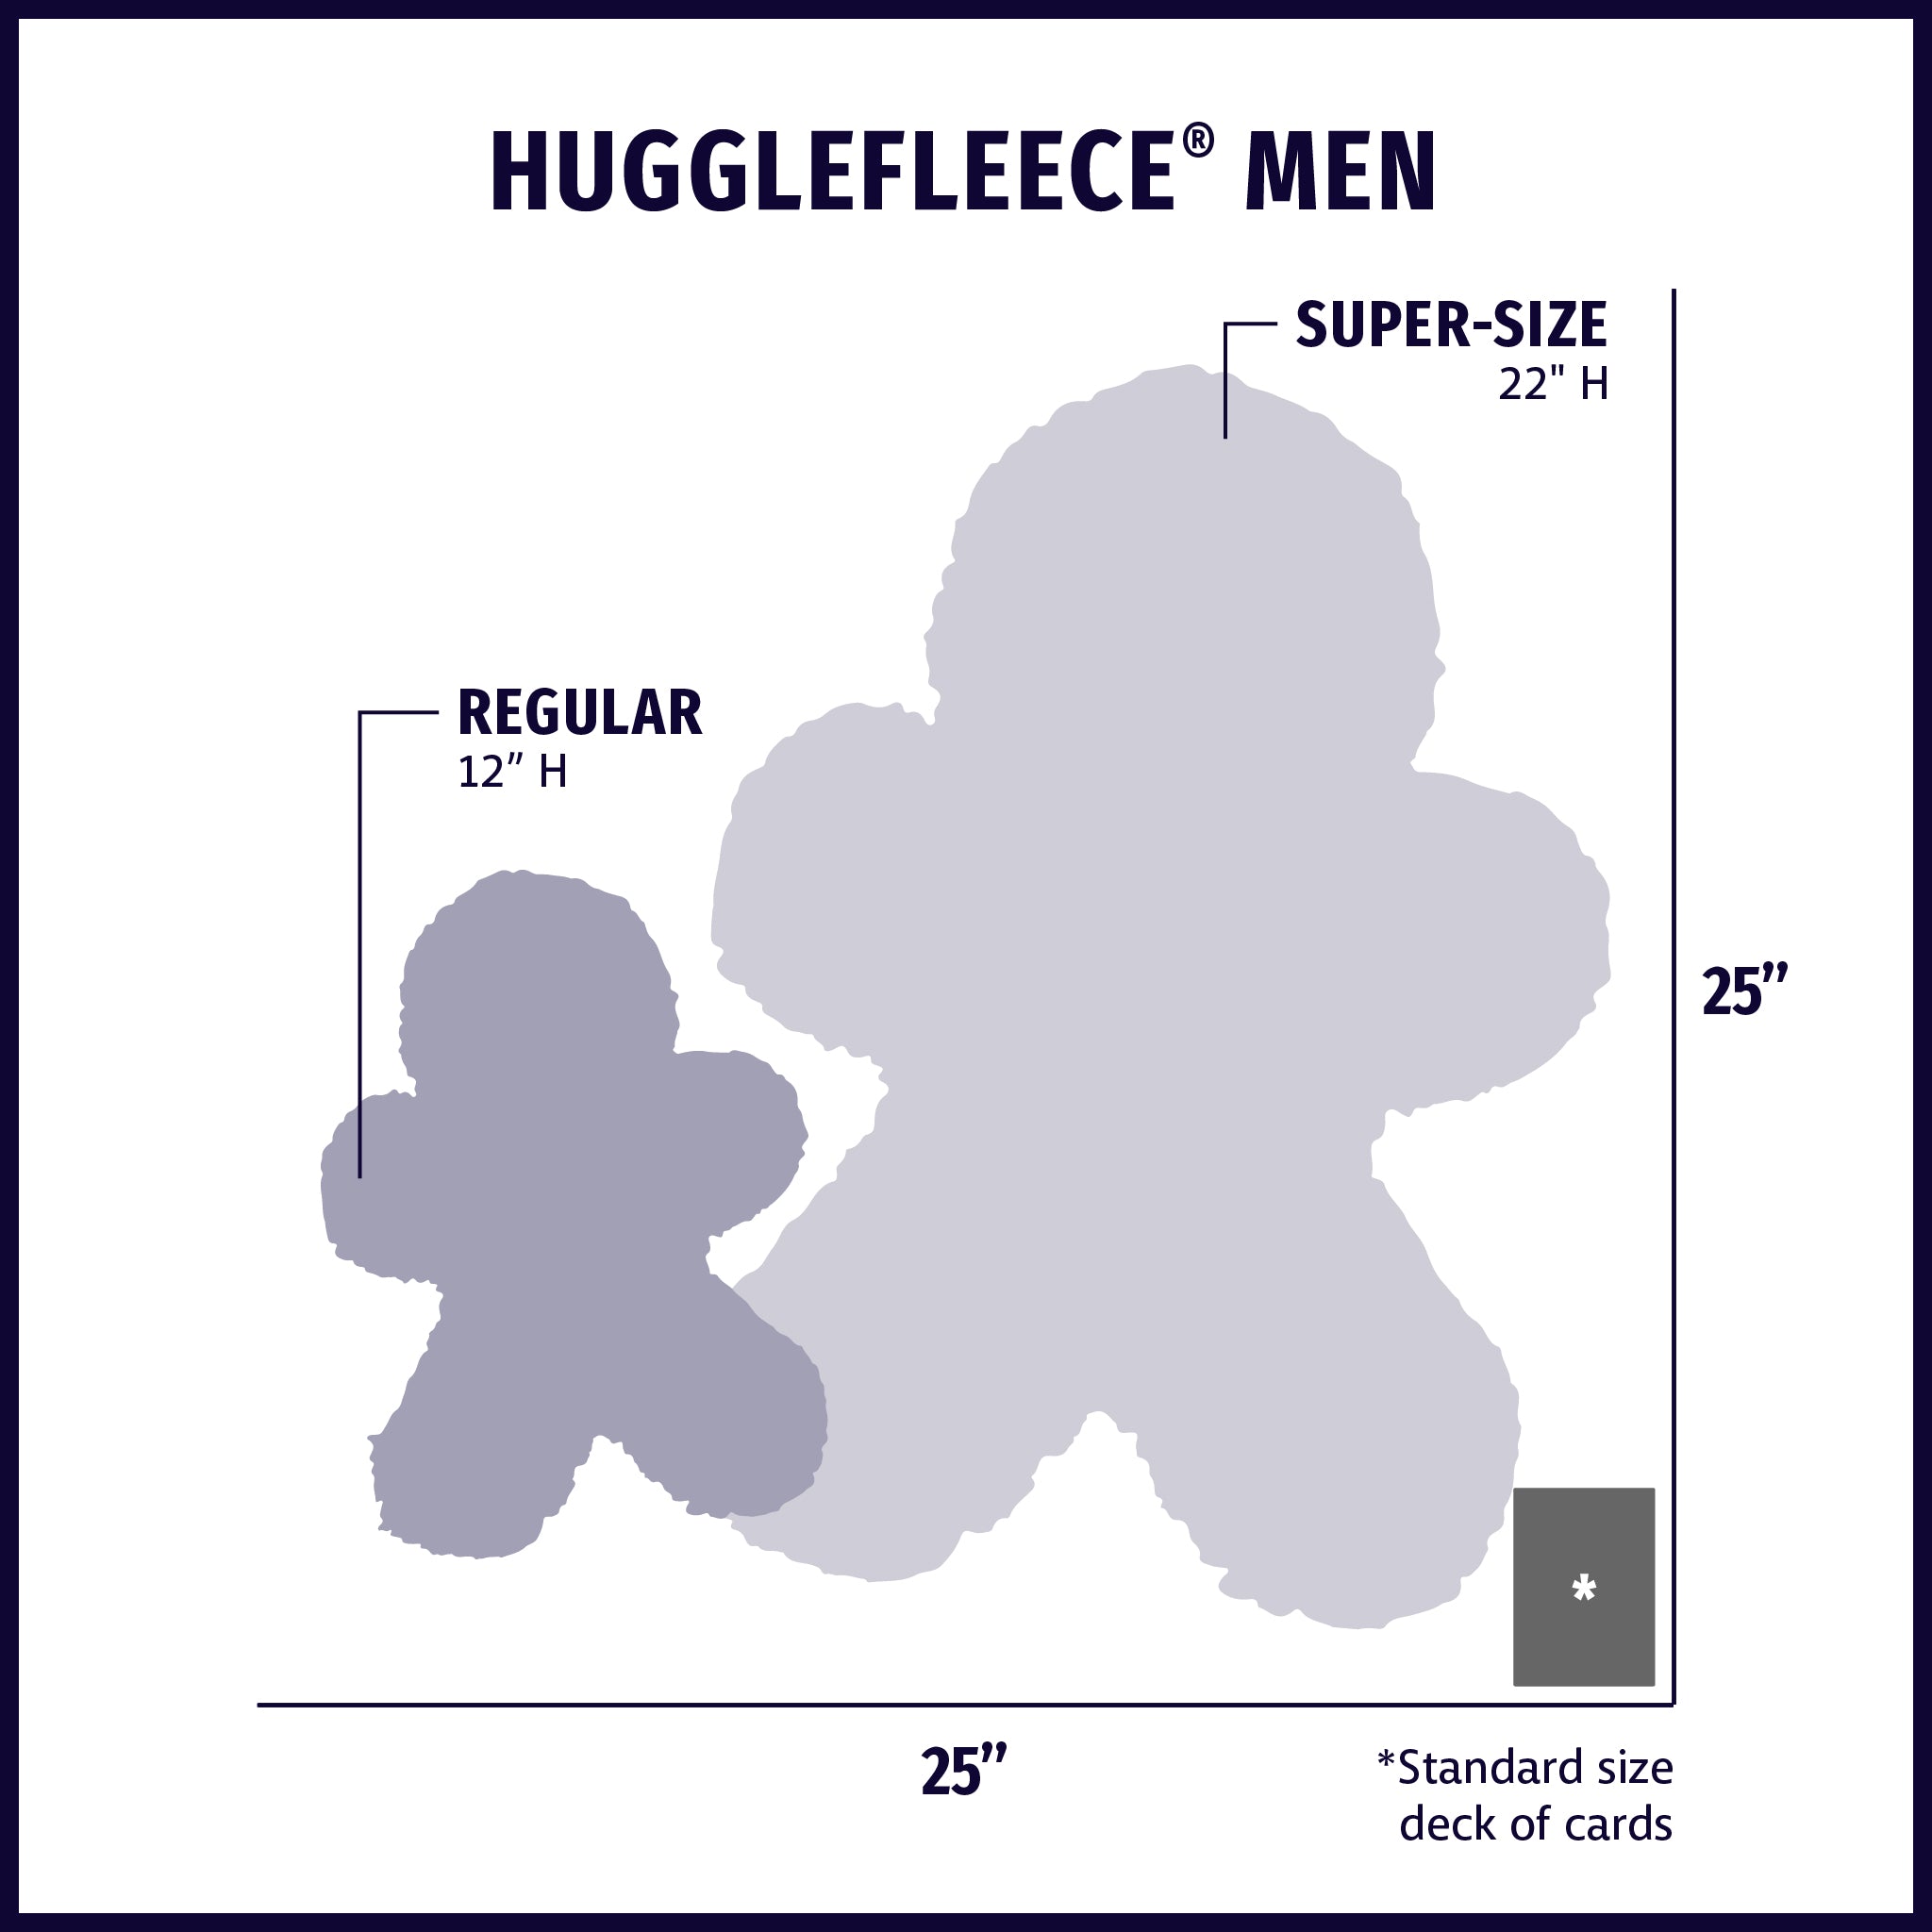 Size chart displaying HuggleFleece® Man plush dog toy silhouettes in regular and super-size with approximate dimensions of each size compared to standard size deck of cards.